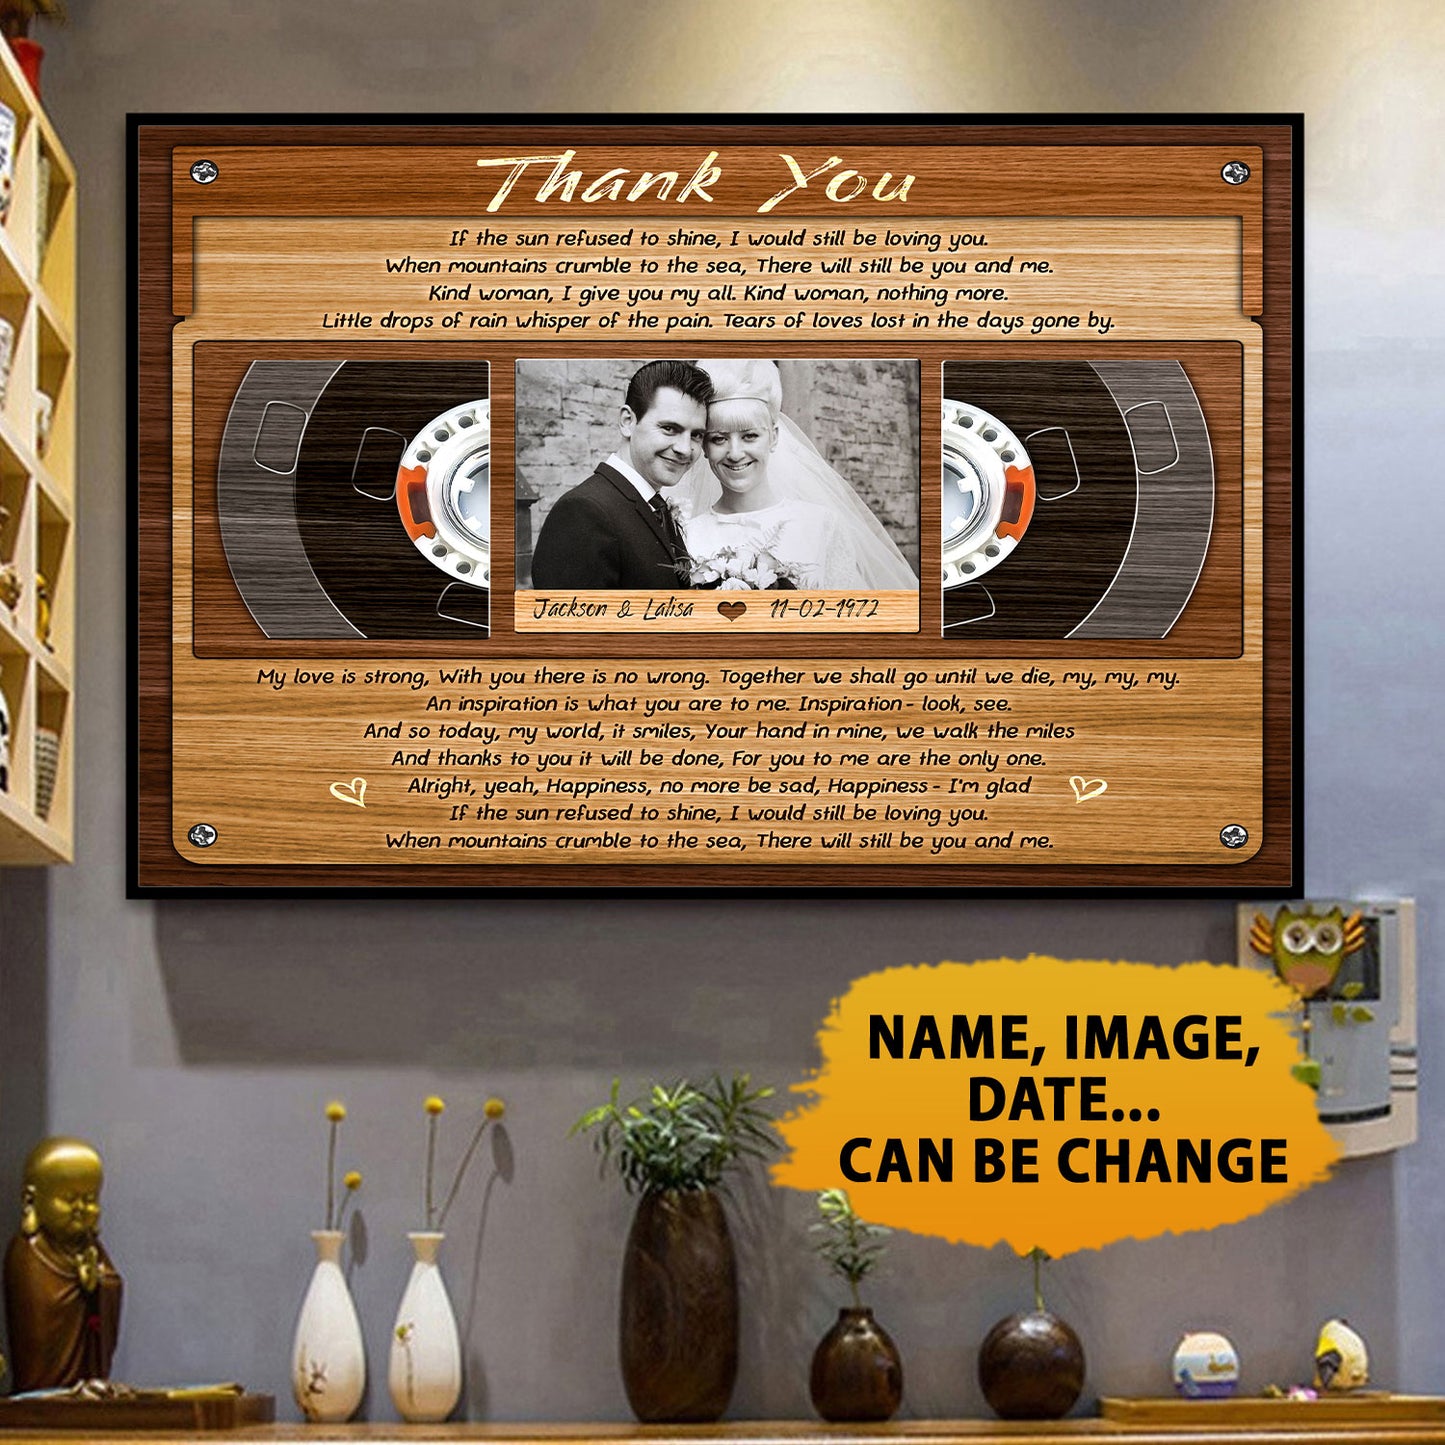 Thank You - Music Lyrics Song Anniversary Personalized Poster